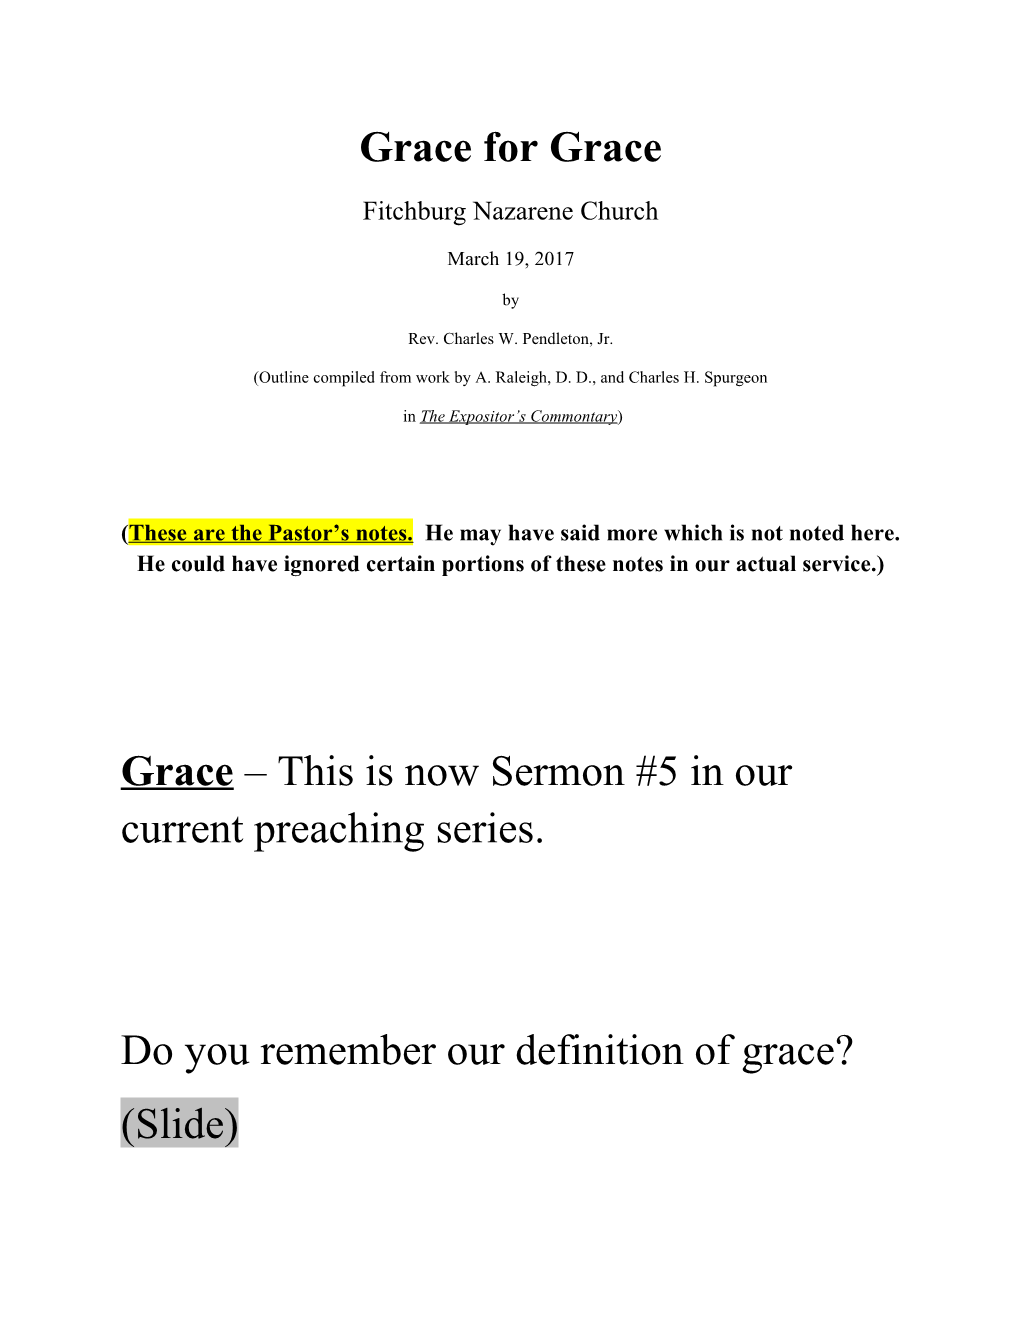 (Outline Compiled from Work by A. Raleigh, D. D., and Charles H. Spurgeon